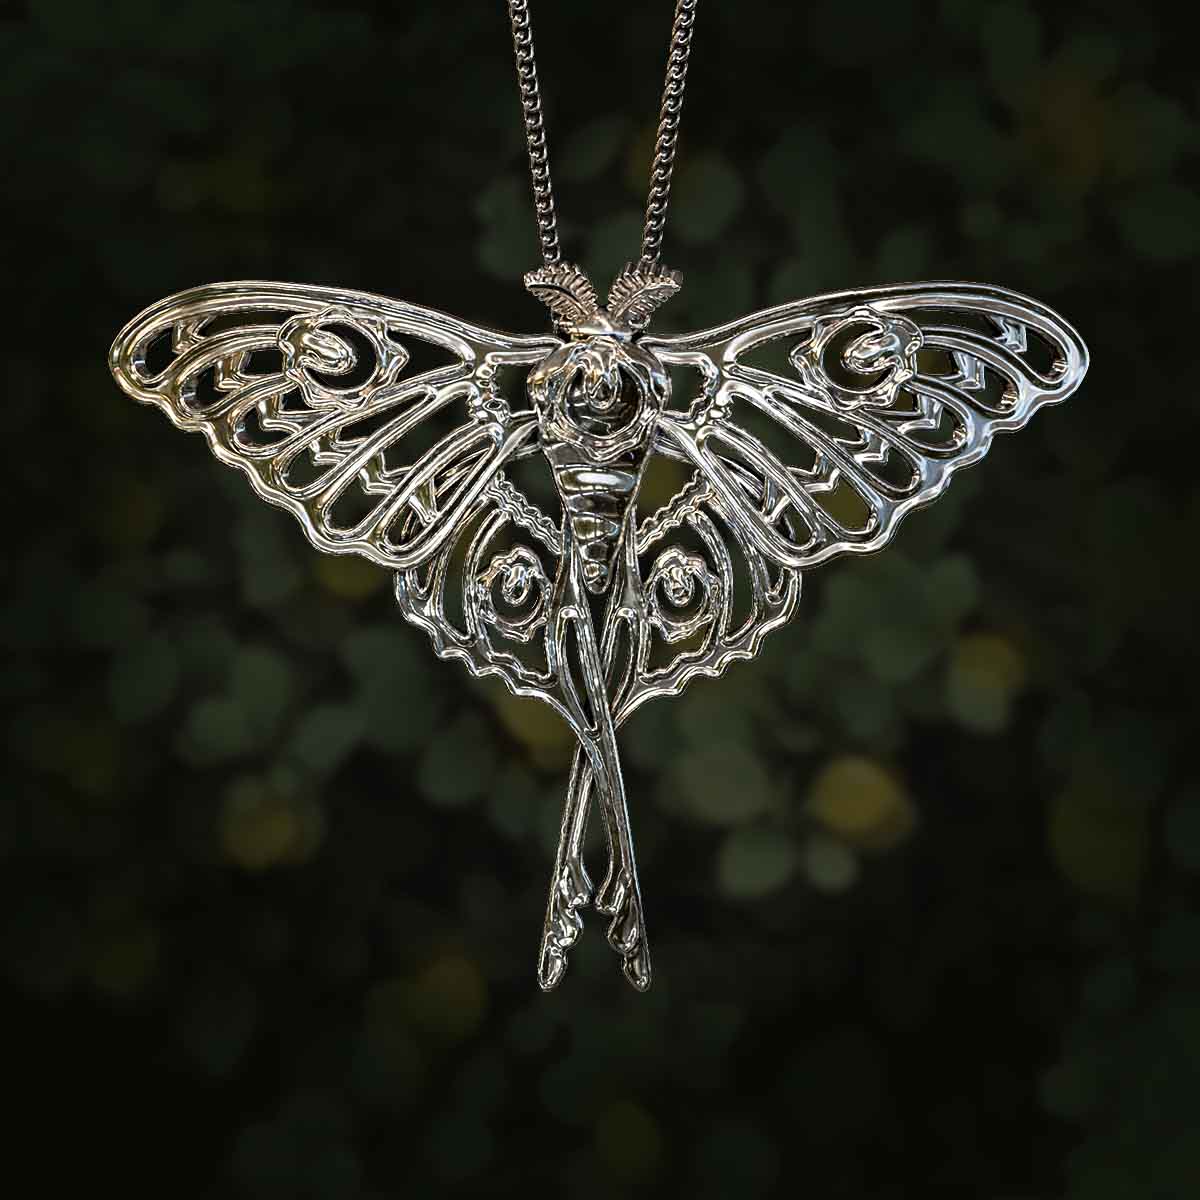     Main-Image-White-Gold-Rhodium-Finish-Comet-Moth-Pendant-Jewelry-For-Necklace